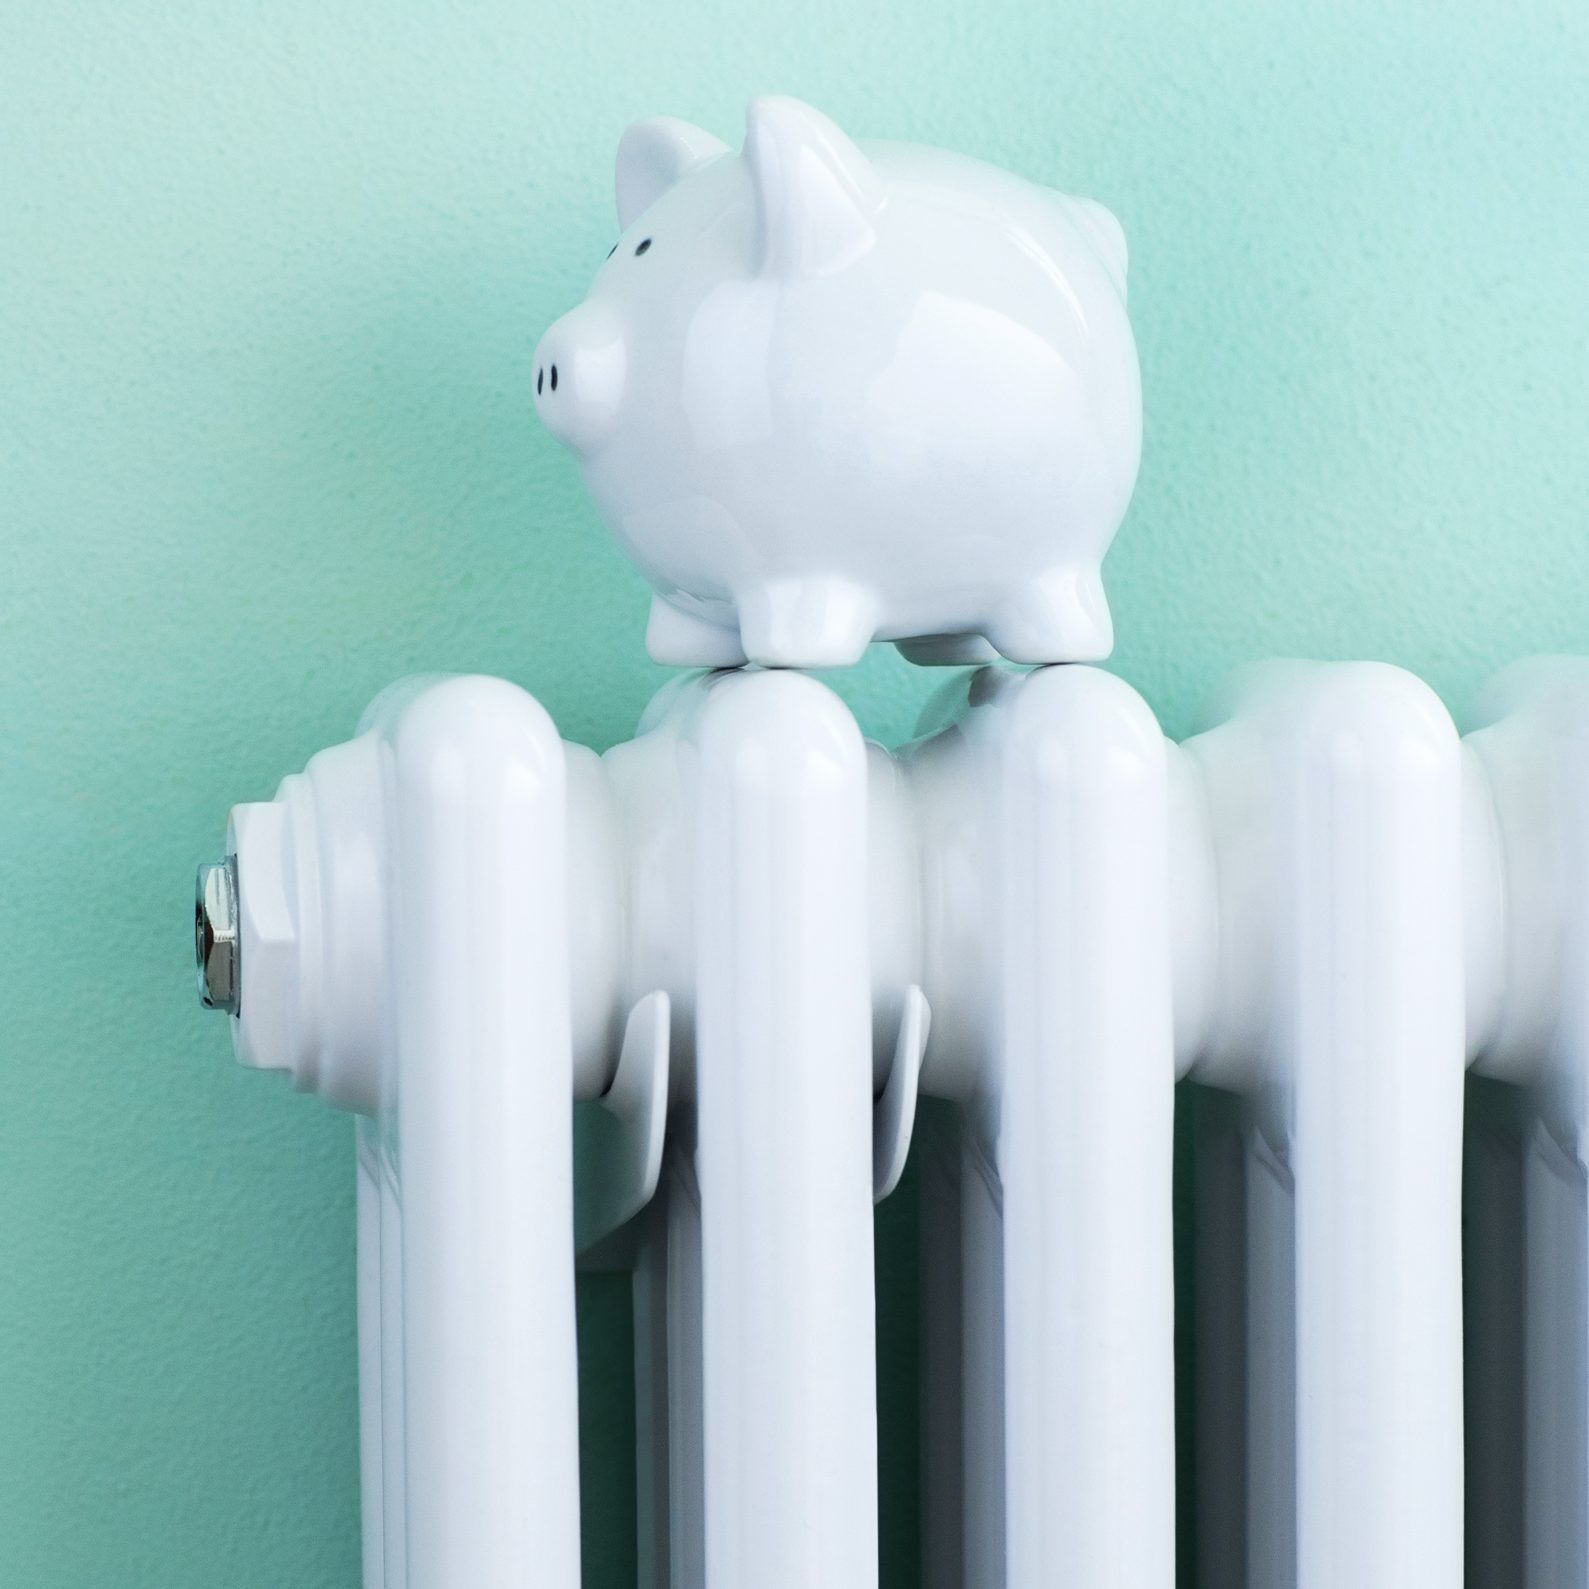 Save Money With These Cost-Effective Energy Efficiency Tips